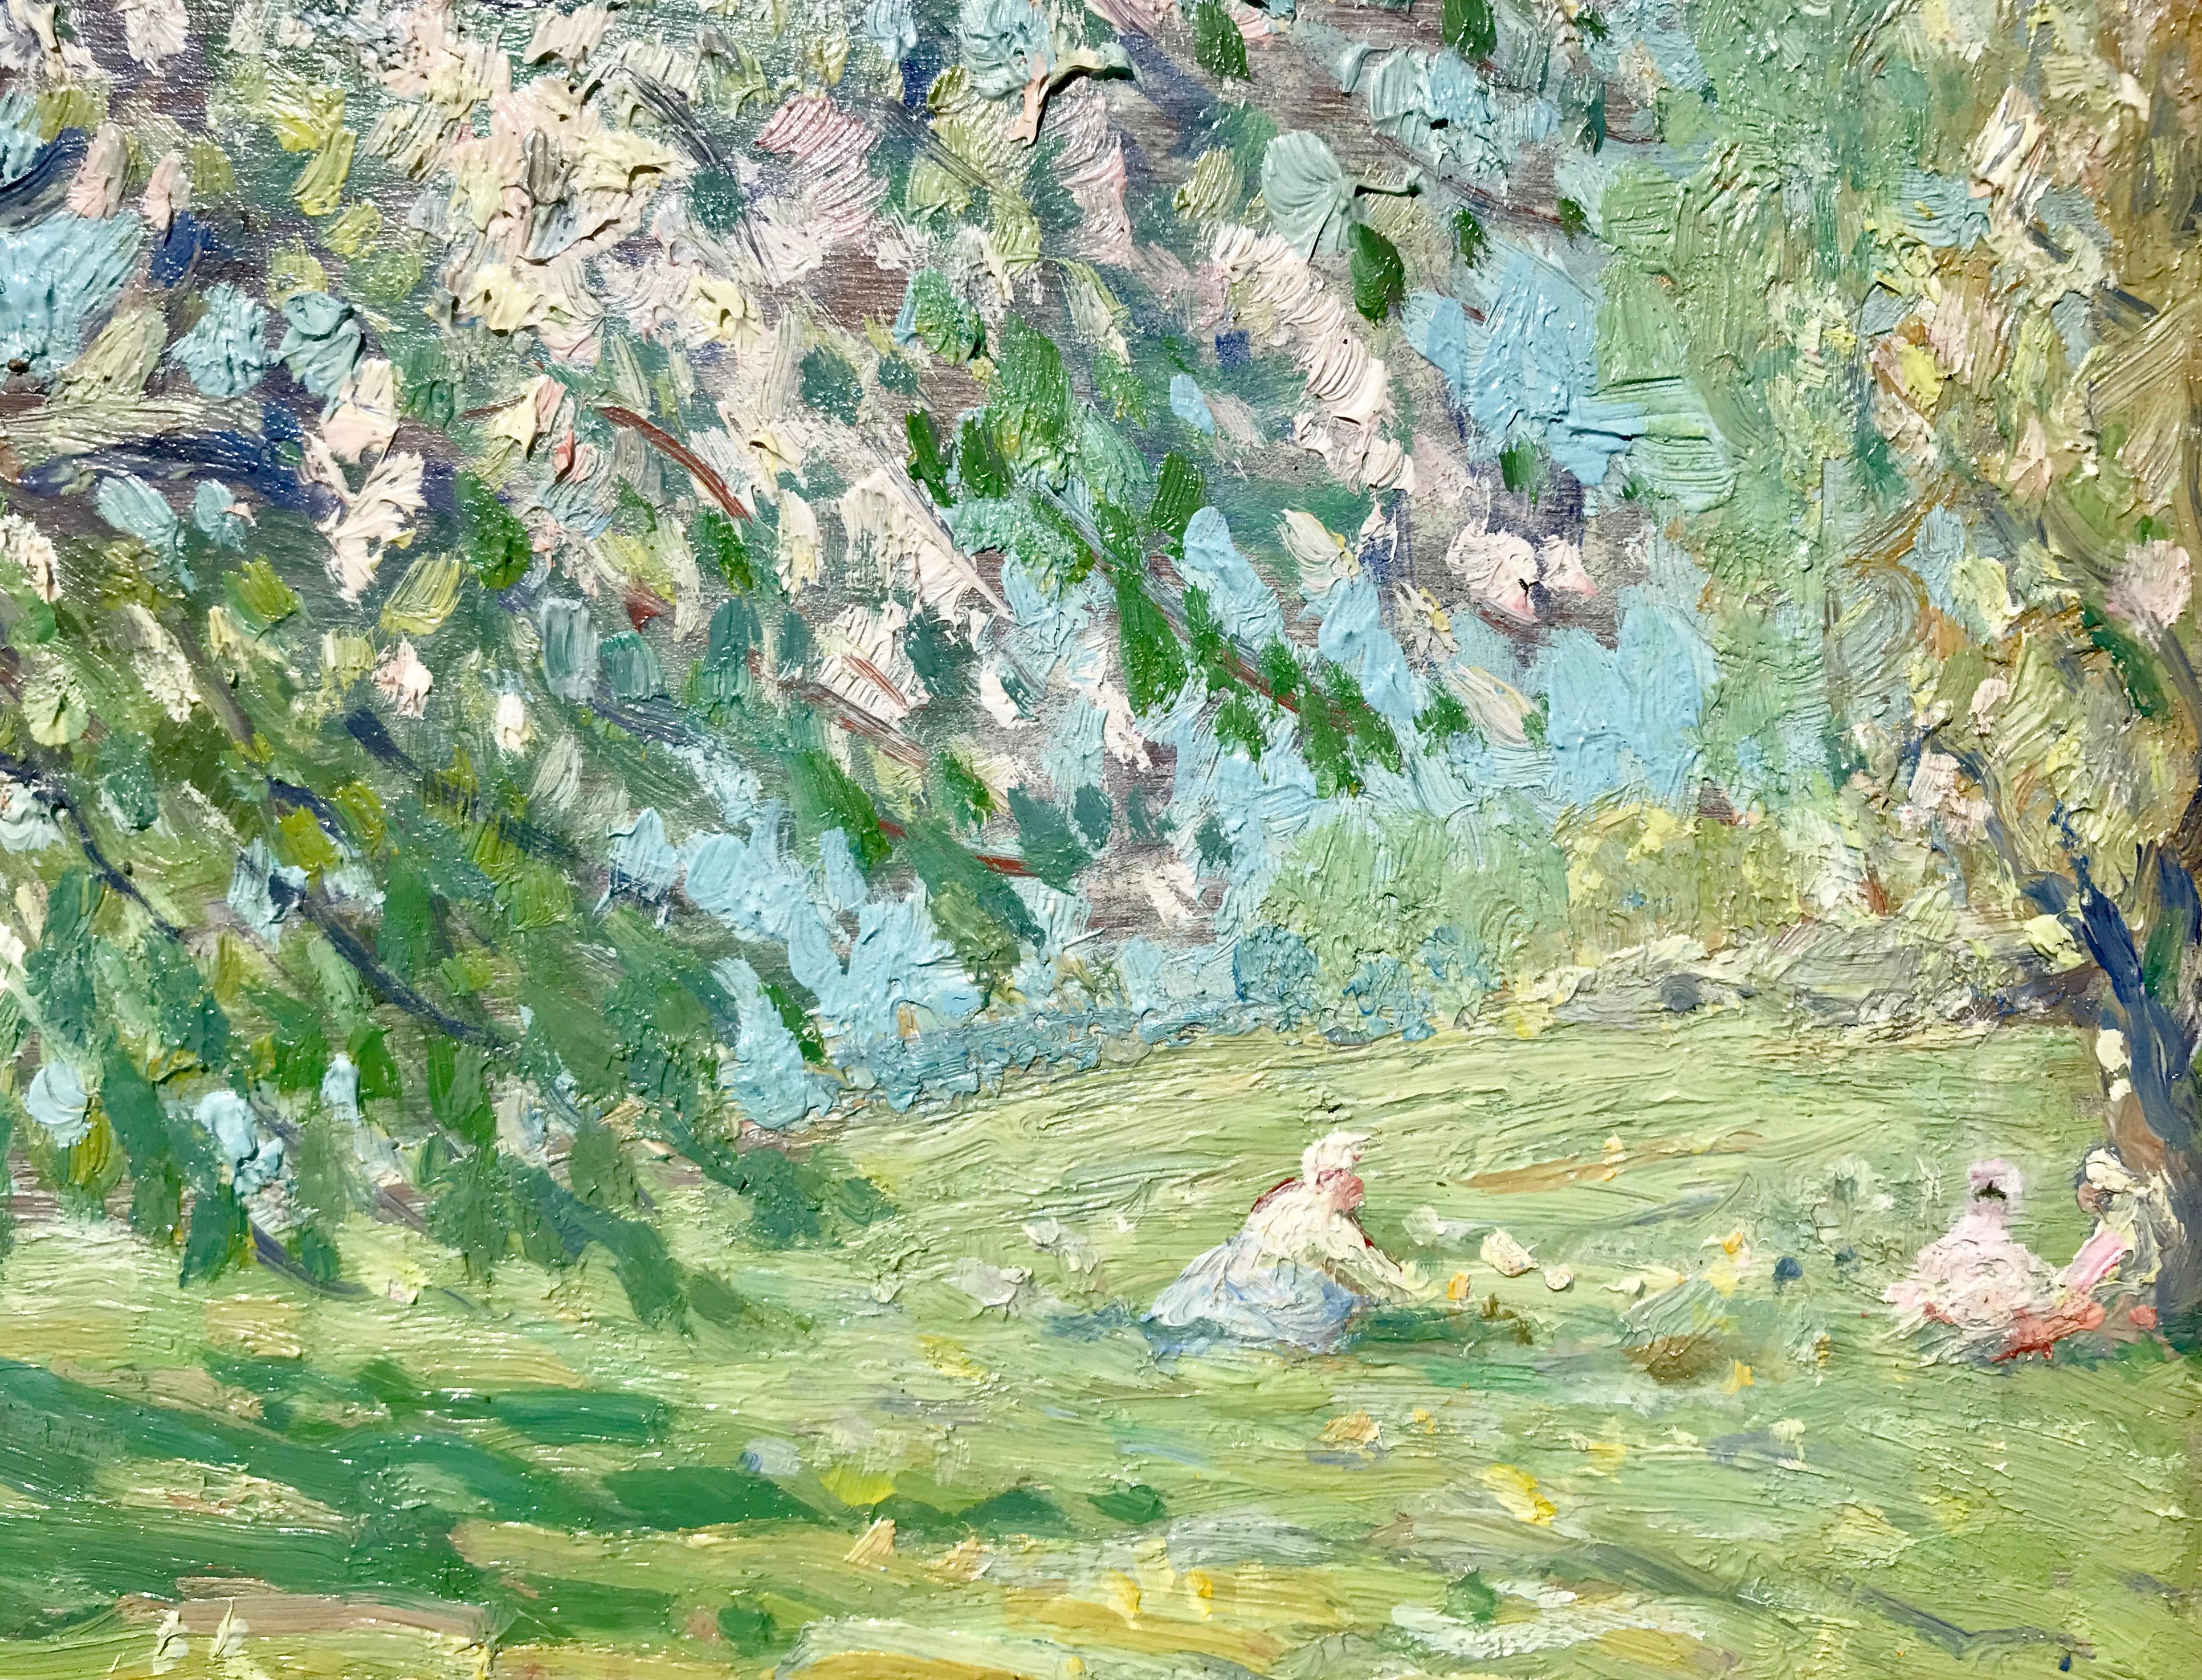 Blossom Time” - Painting by George J. Stengel